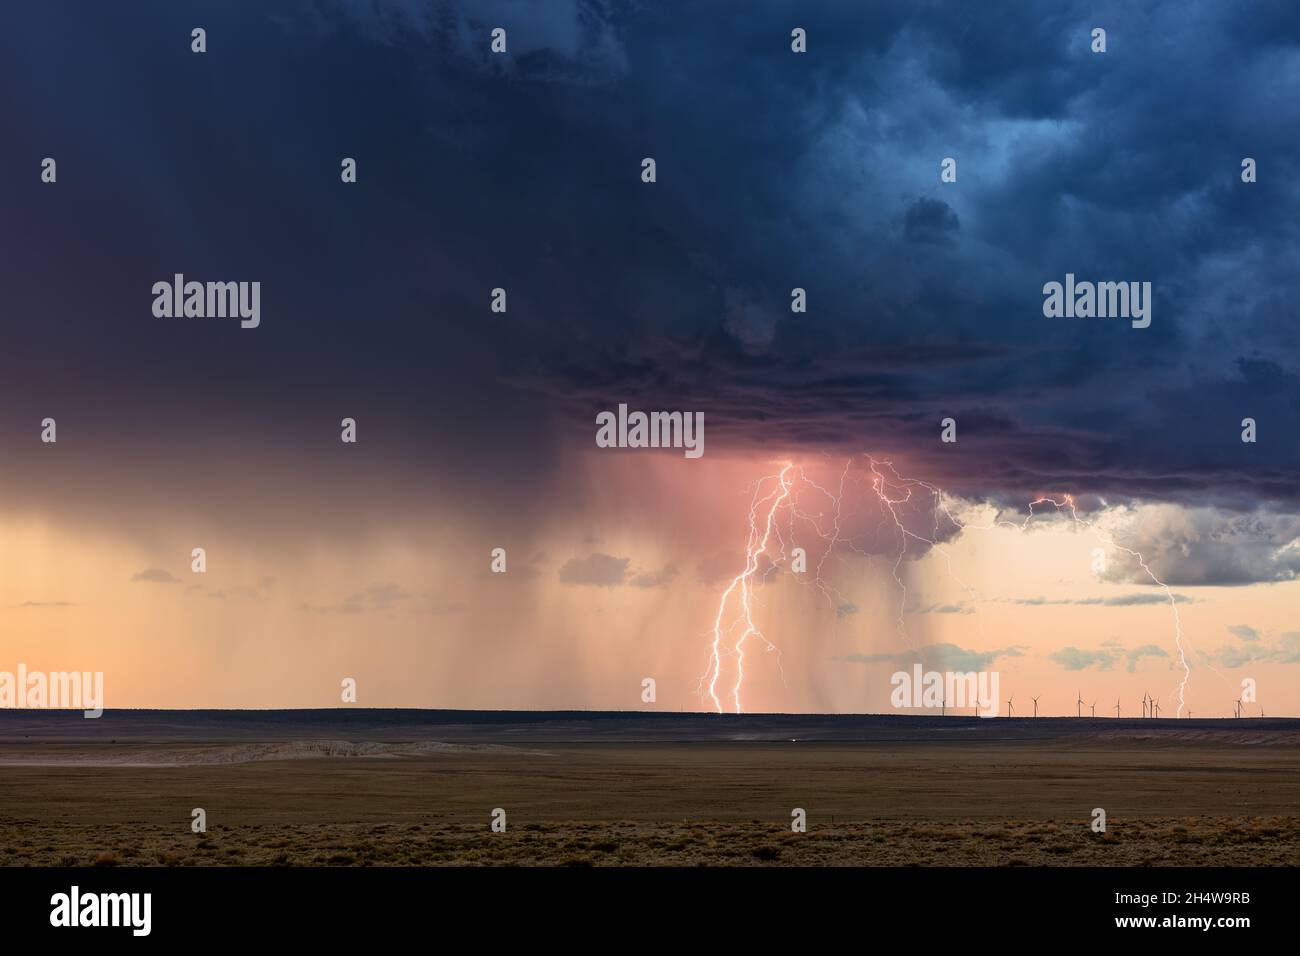 Thunderstorm and lightning strike with sunset sky near Vaughn, New Mexico Stock Photo